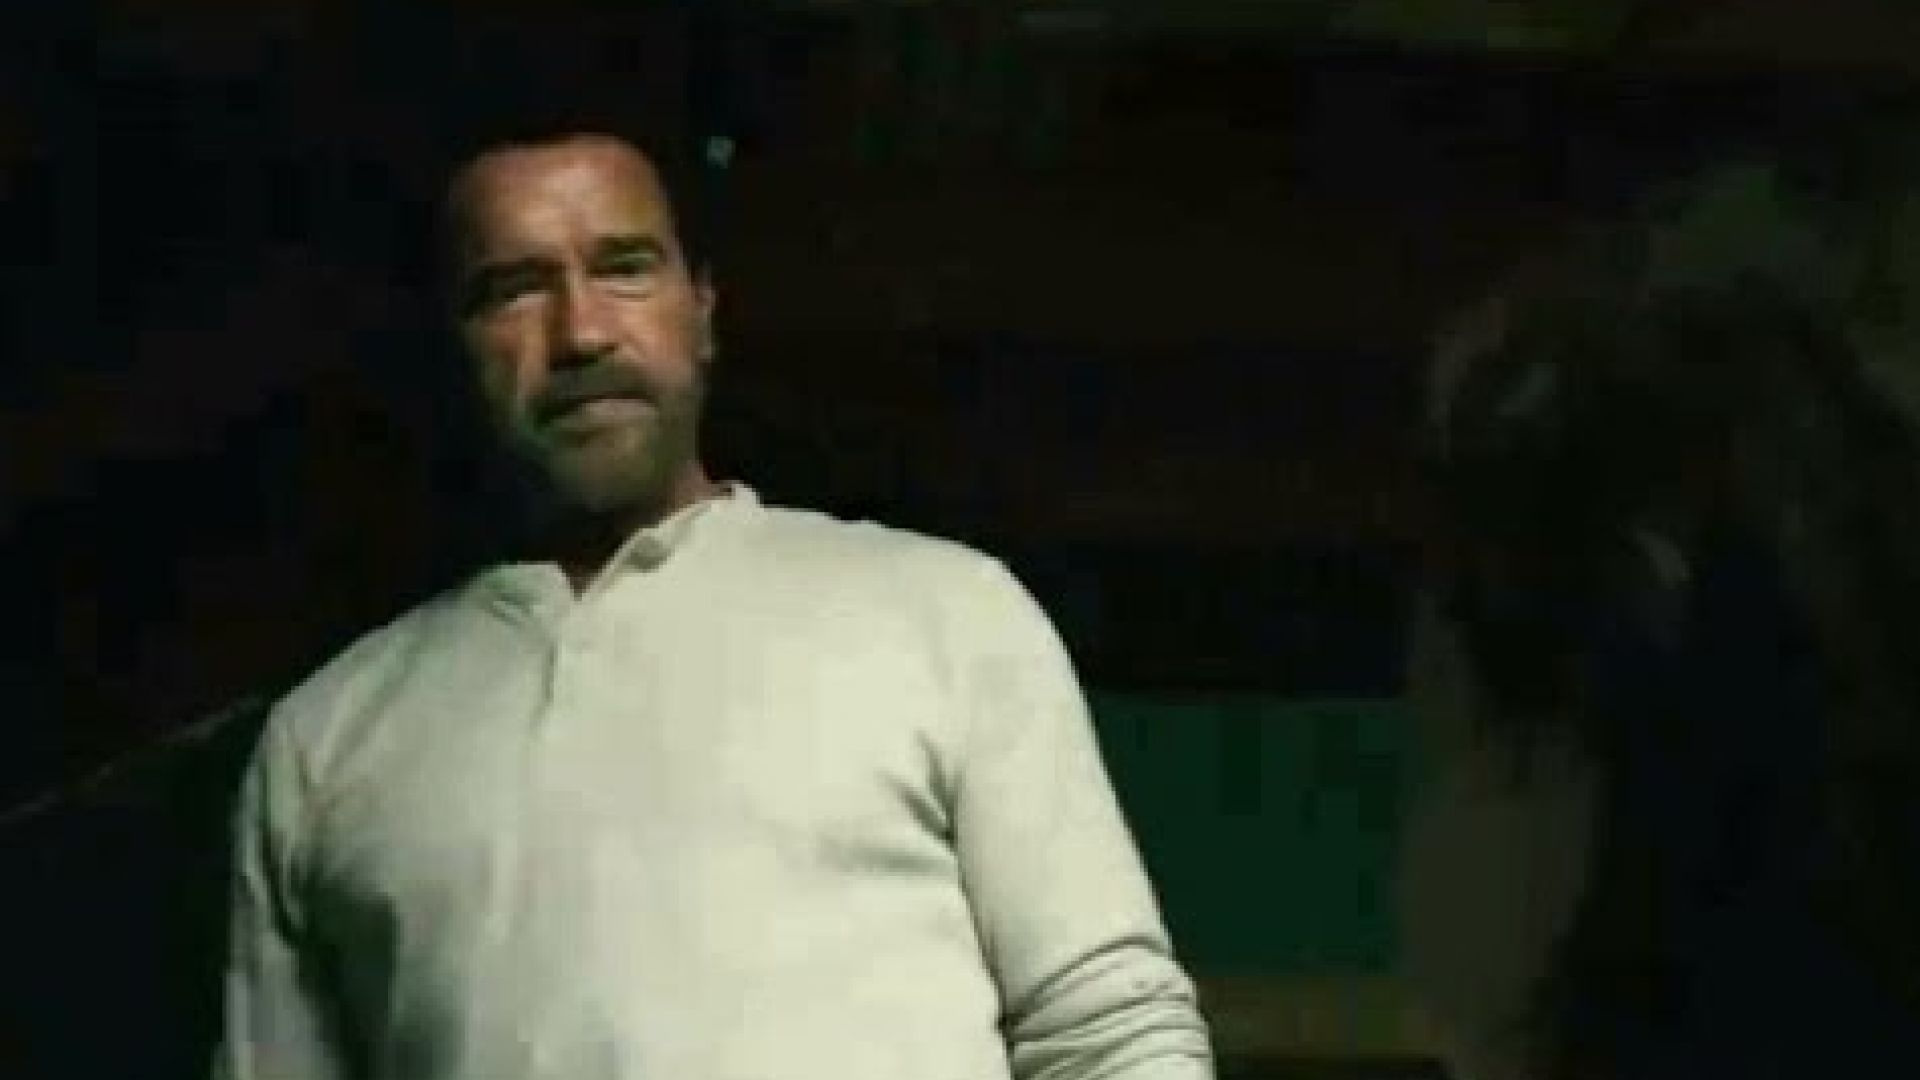 What If I Hurt You in New Clip from 'Maggie' Starring Arnold